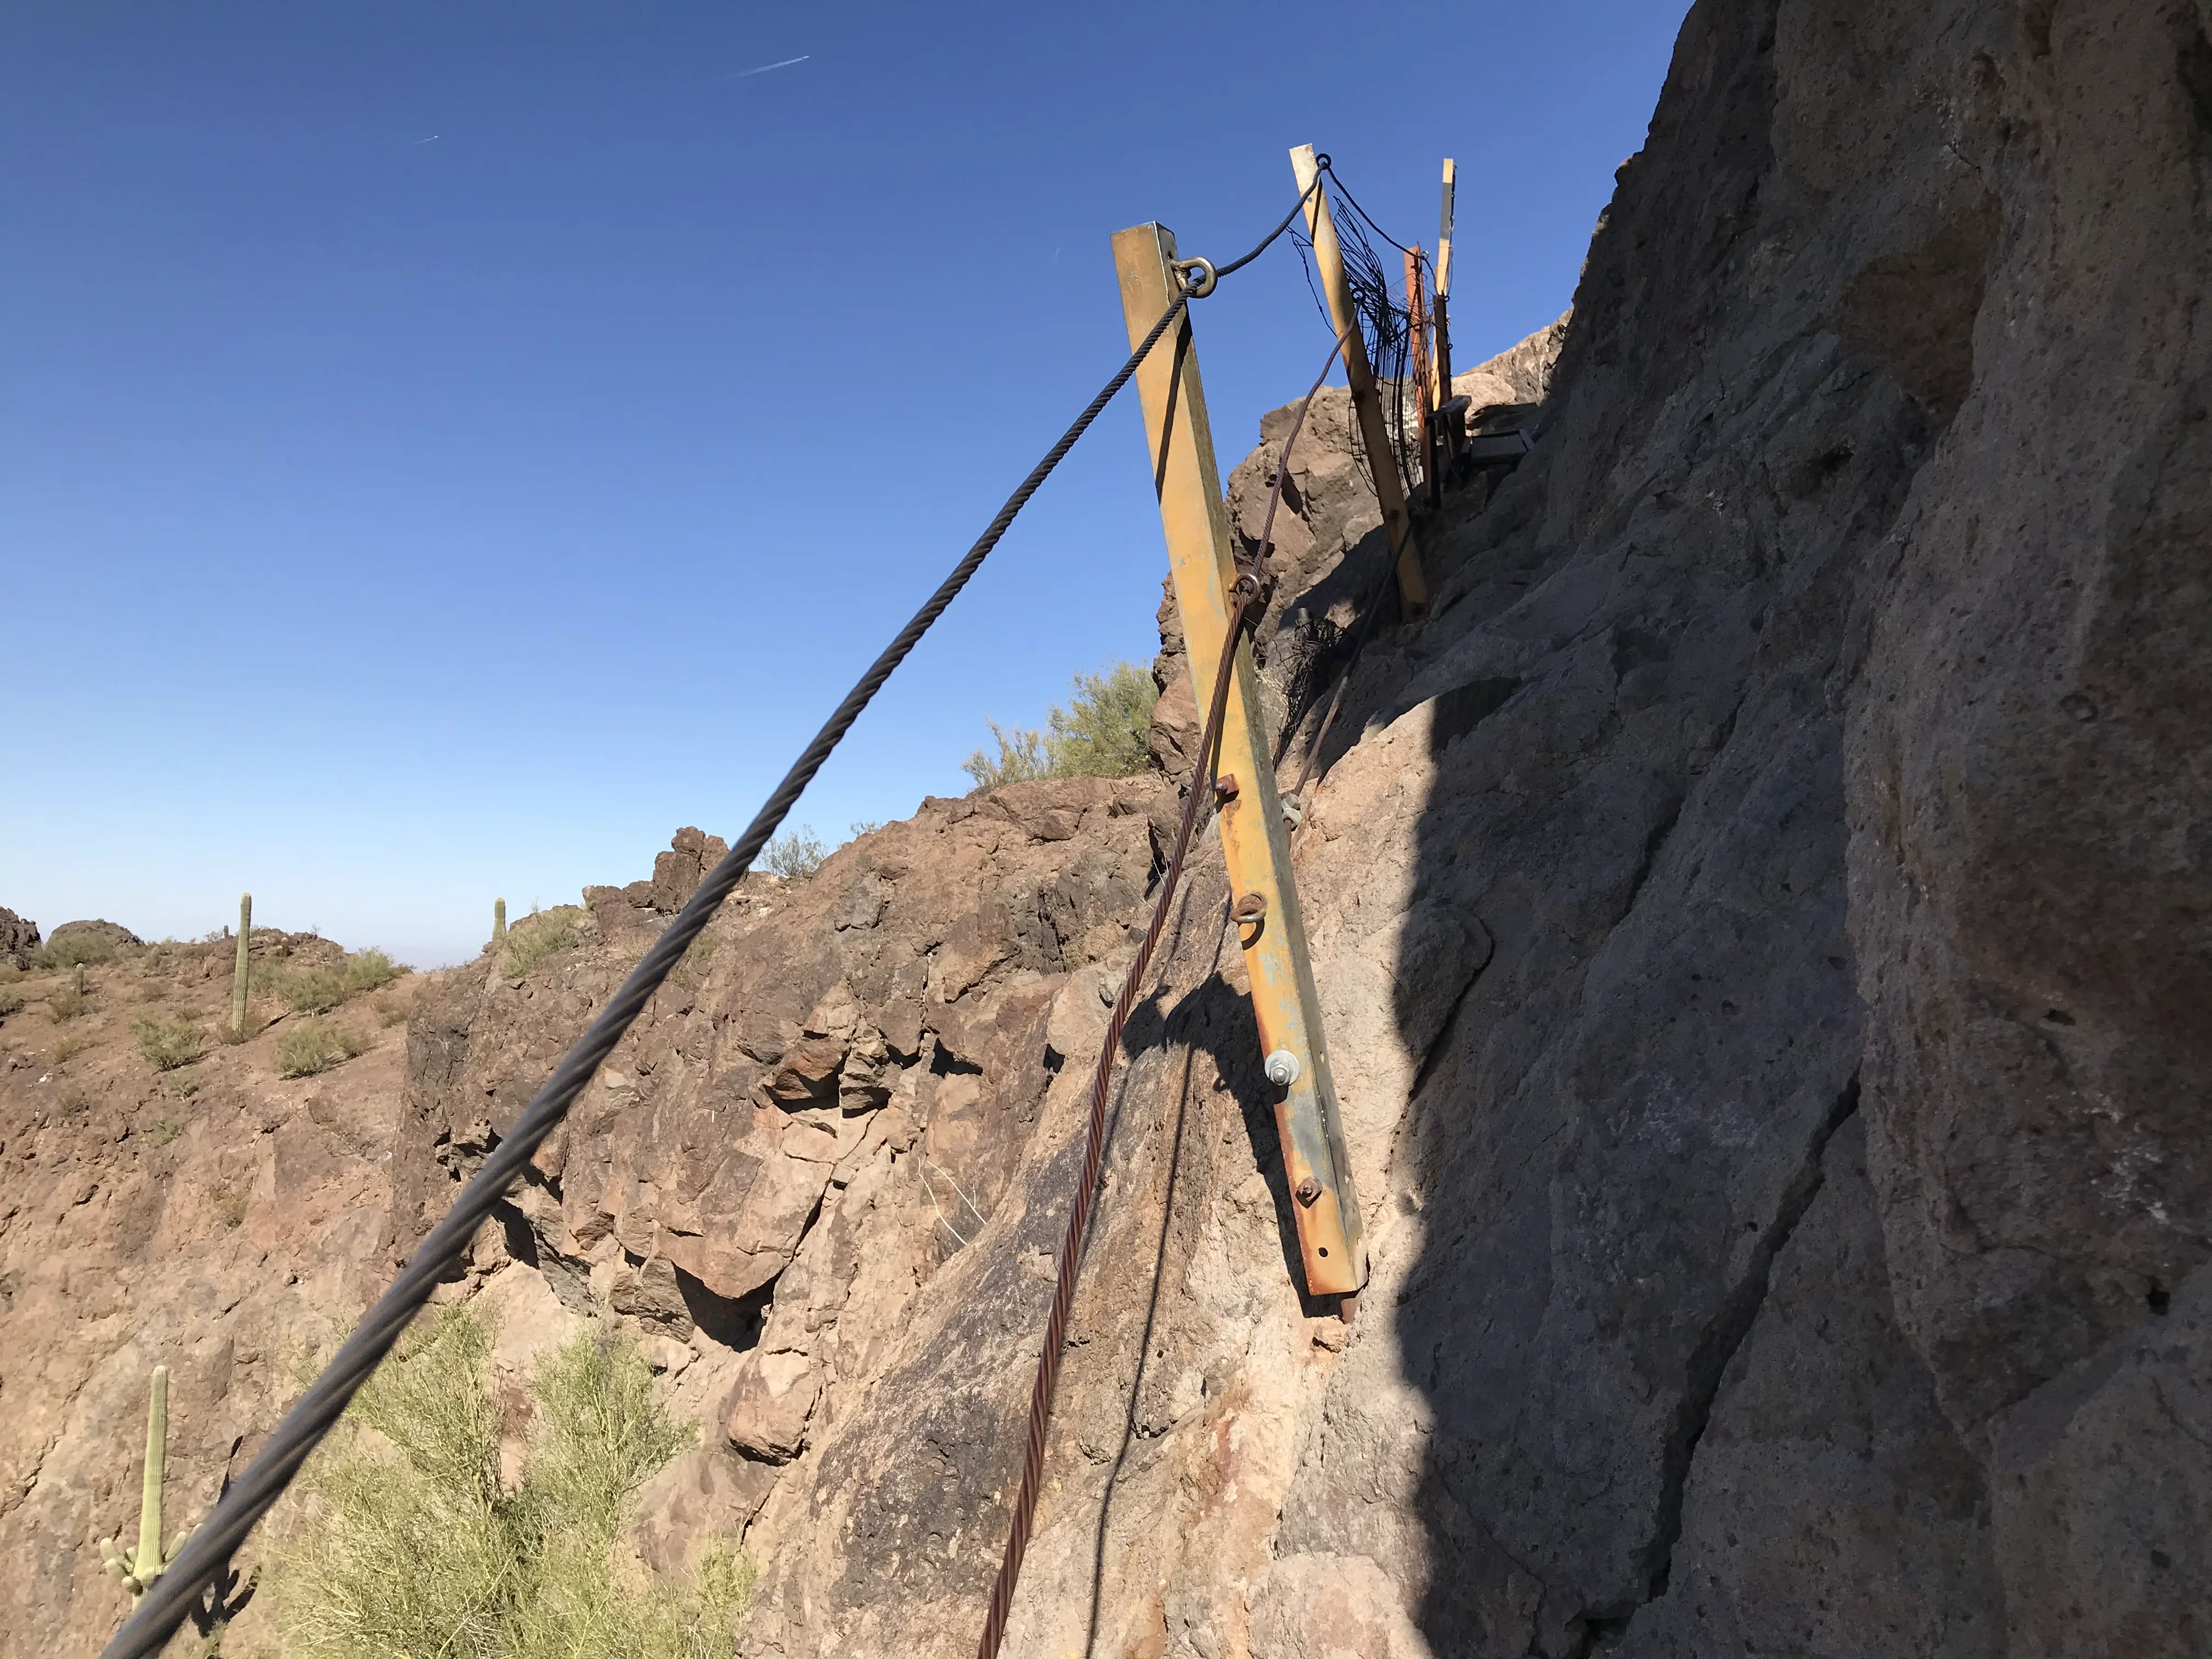 Cables are jutting out along the steep brown mountainside. The other side of the cables is nothing but a tall scary drop down the mountain. In Picacho Peak State Park between Tucson and Phoenix, Arizona, United States.